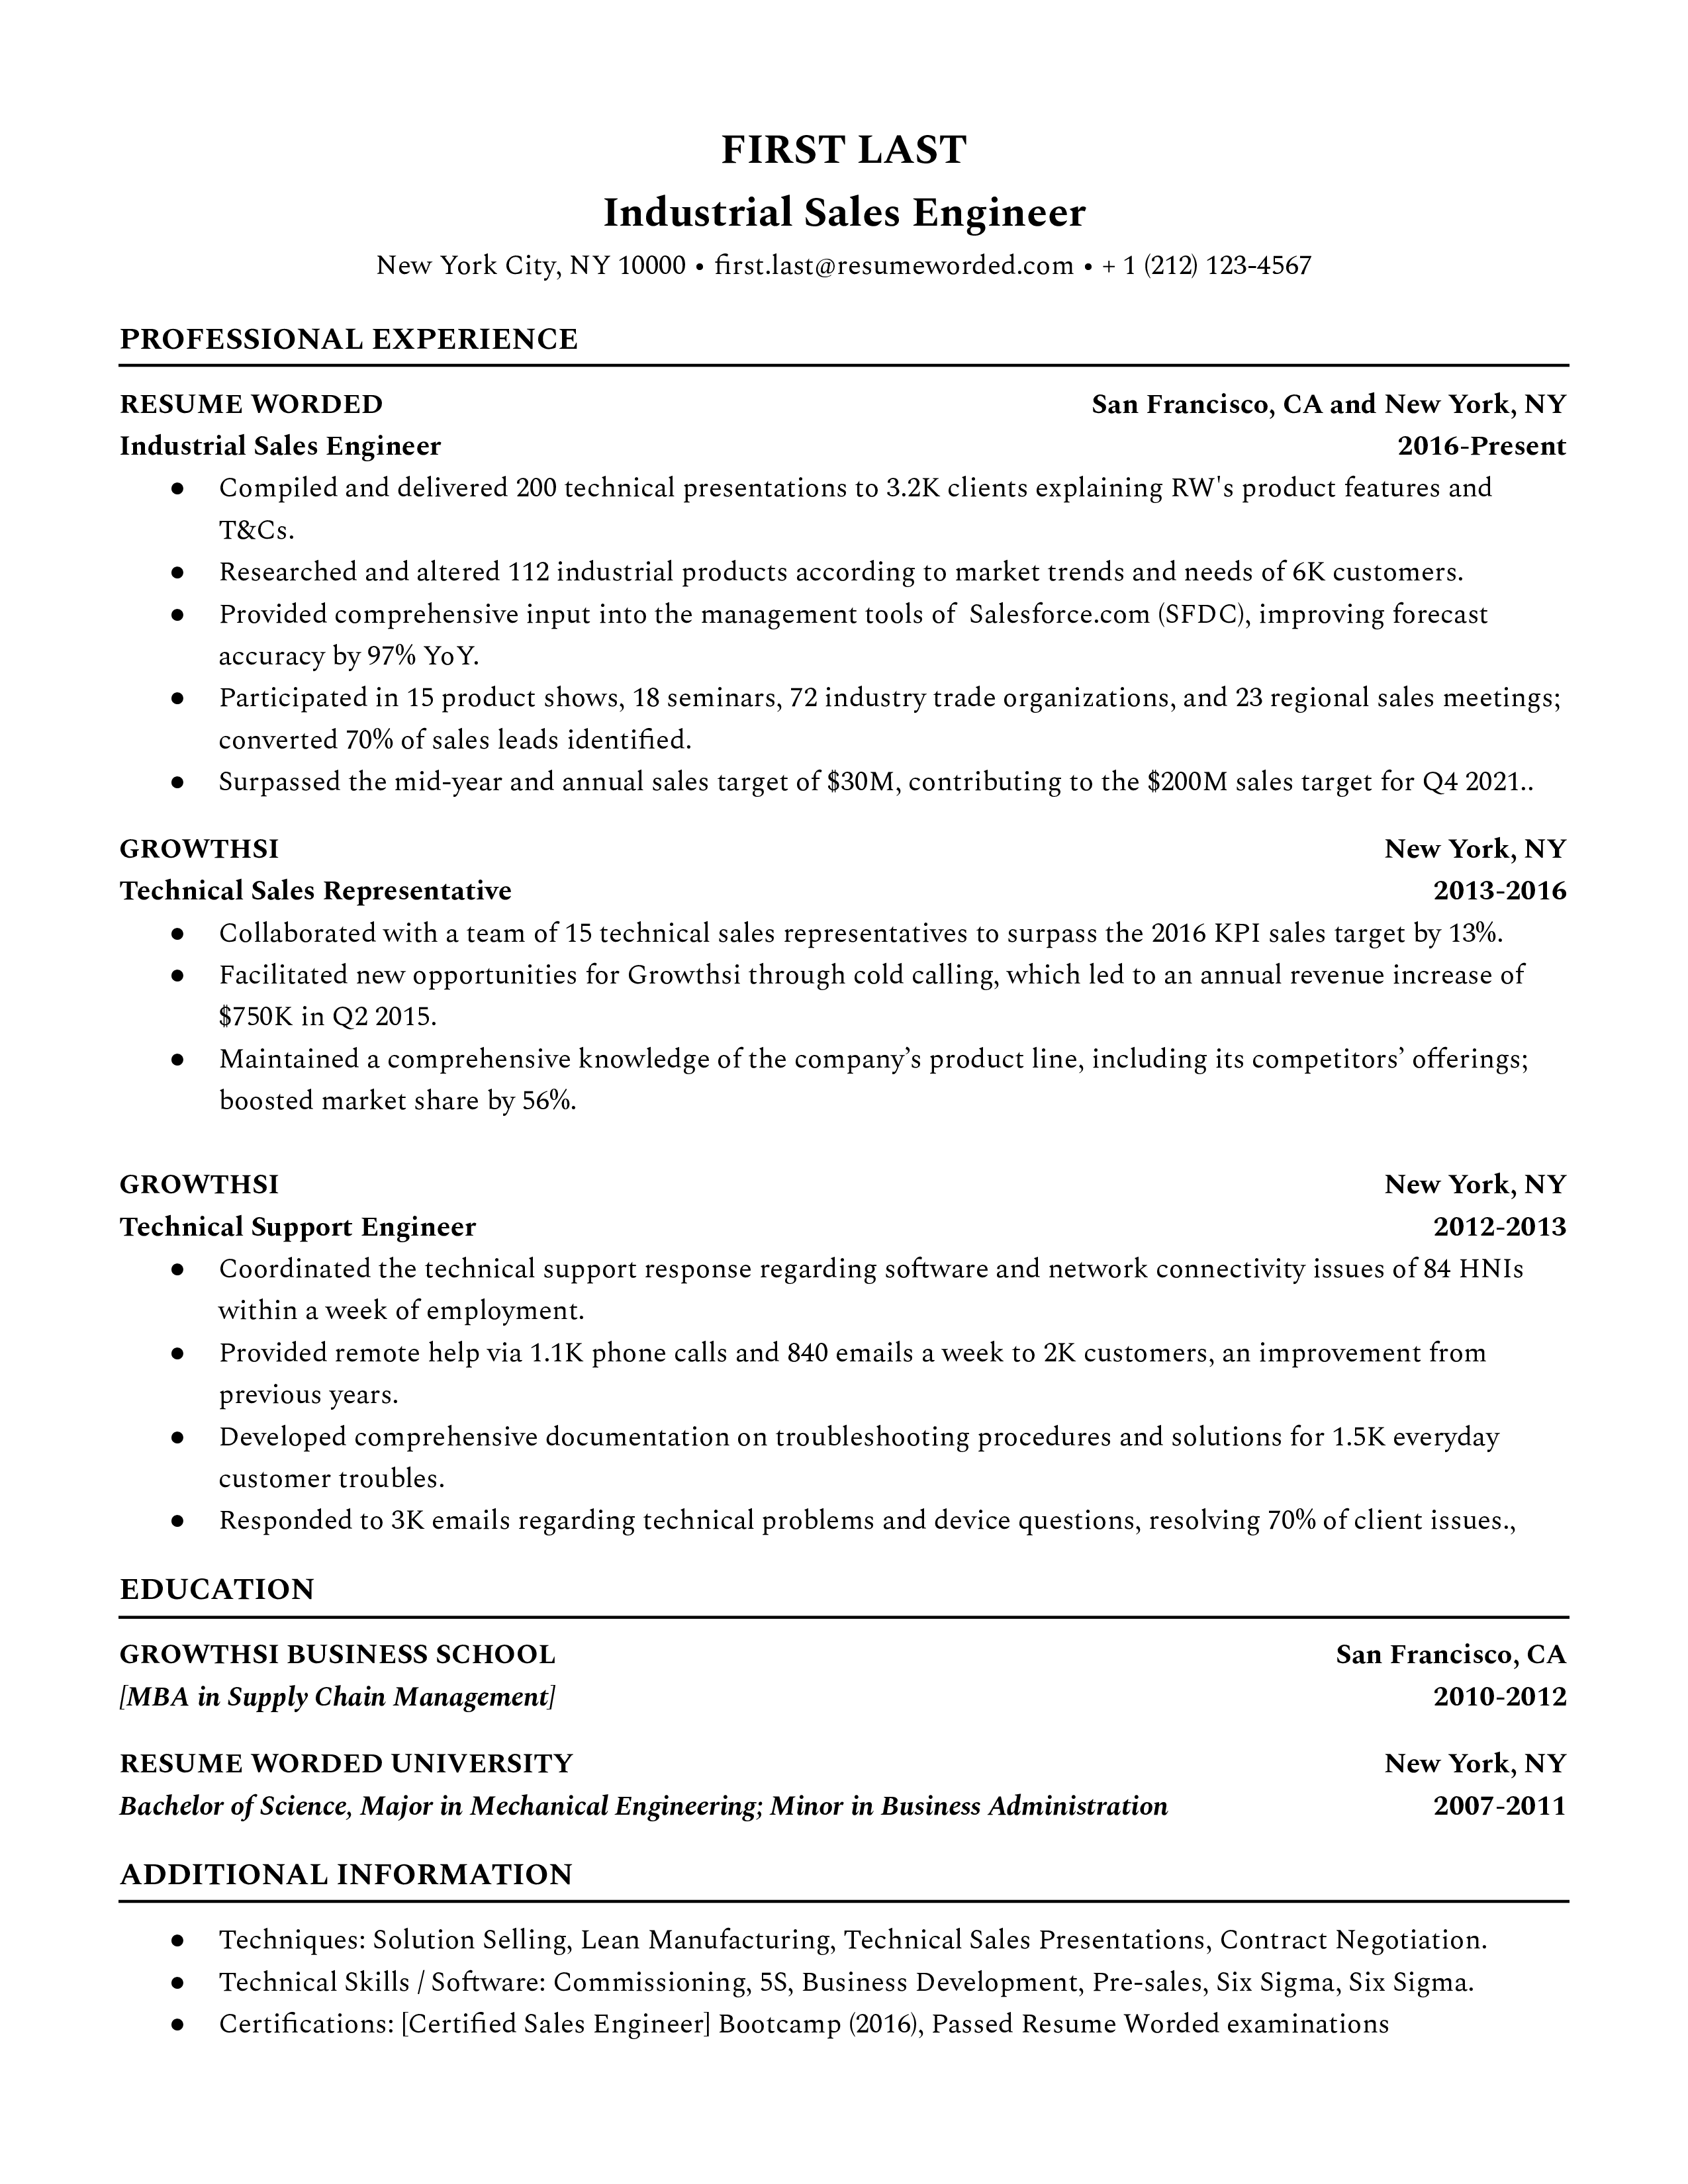 An industrial sales engineer resume template that prioritizes work experience